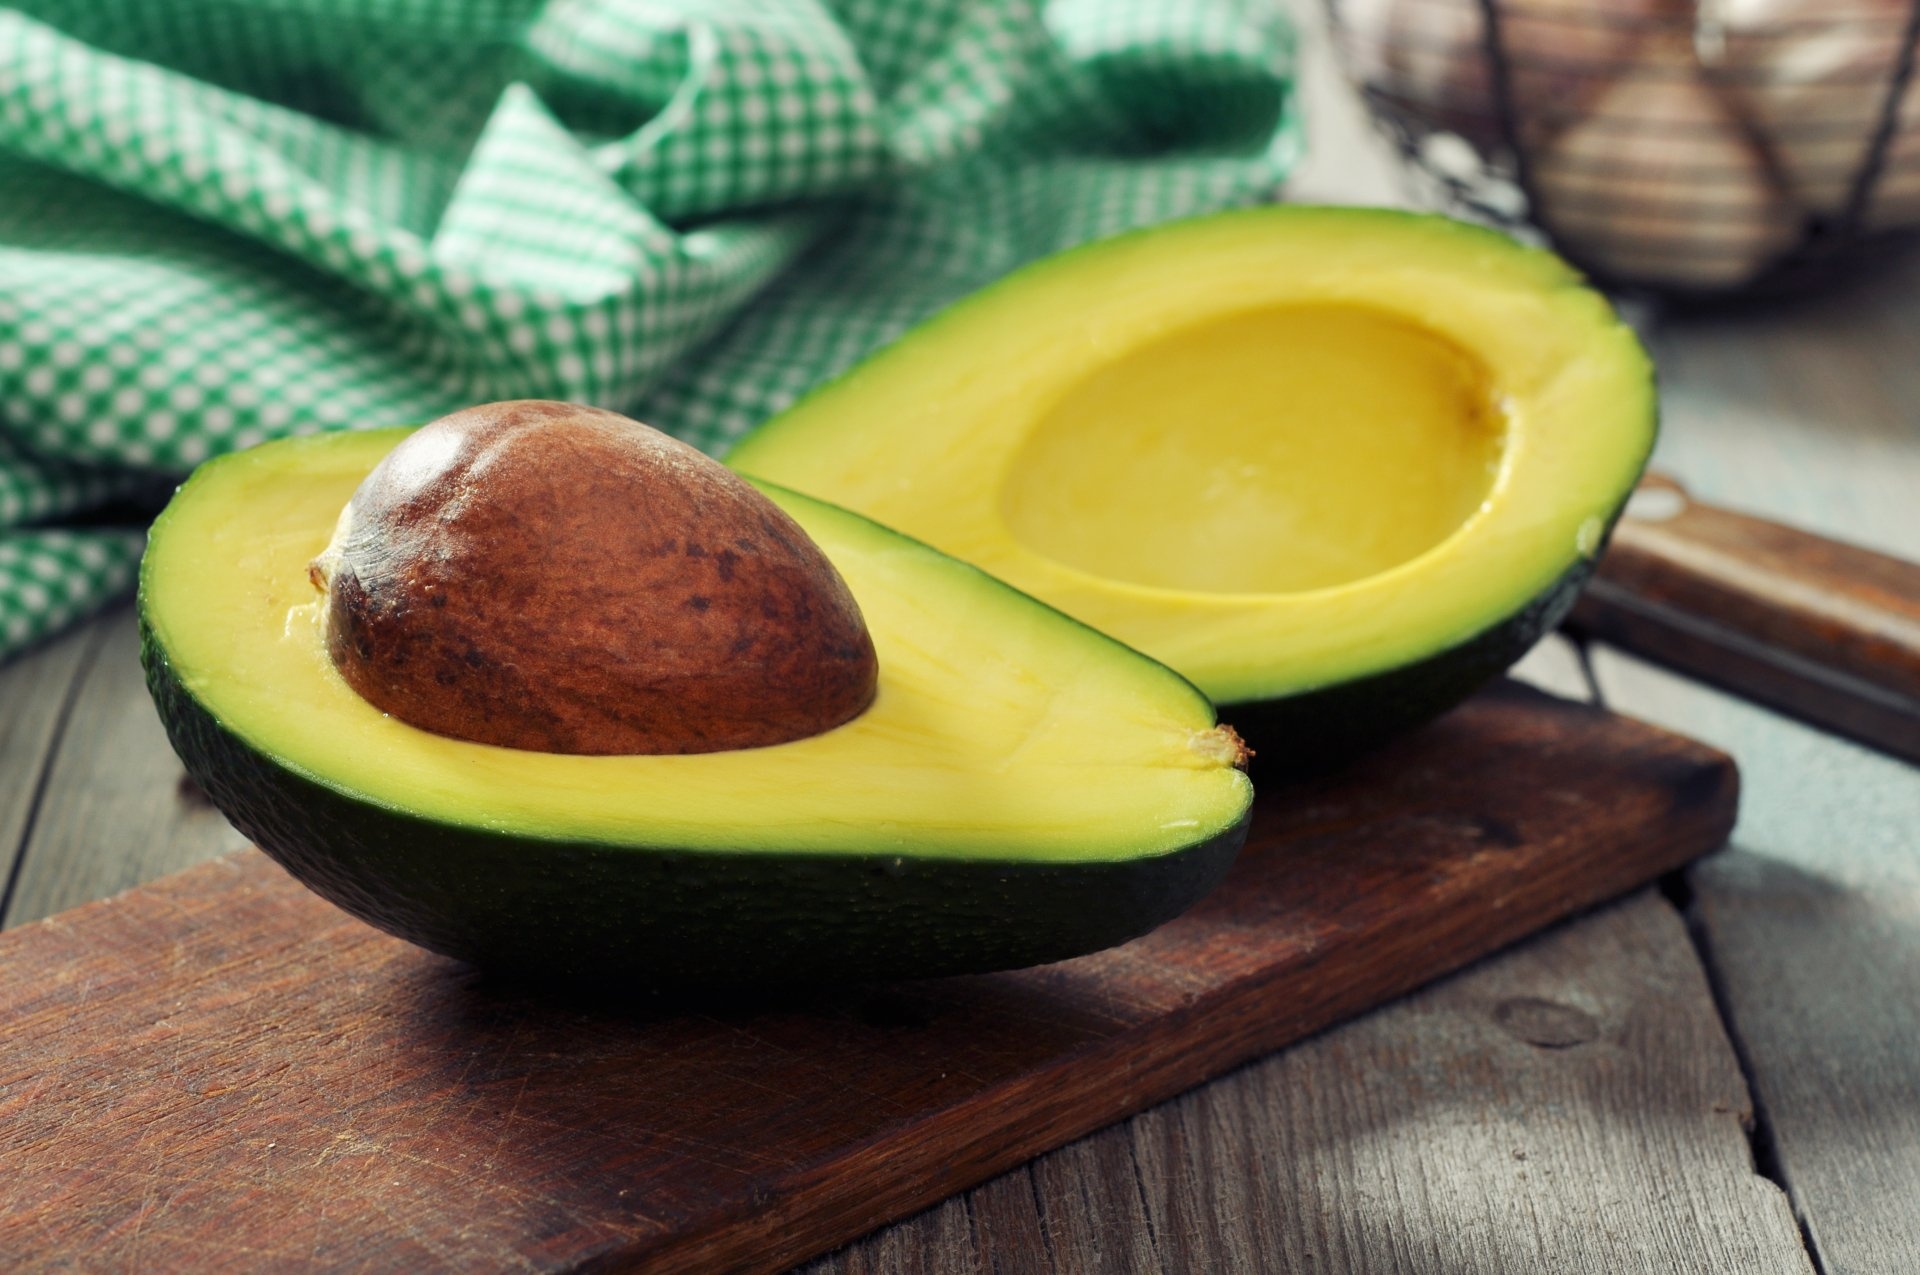 Avocado: Provides a substantial amount of monounsaturated fatty acids. 1920x1280 HD Wallpaper.